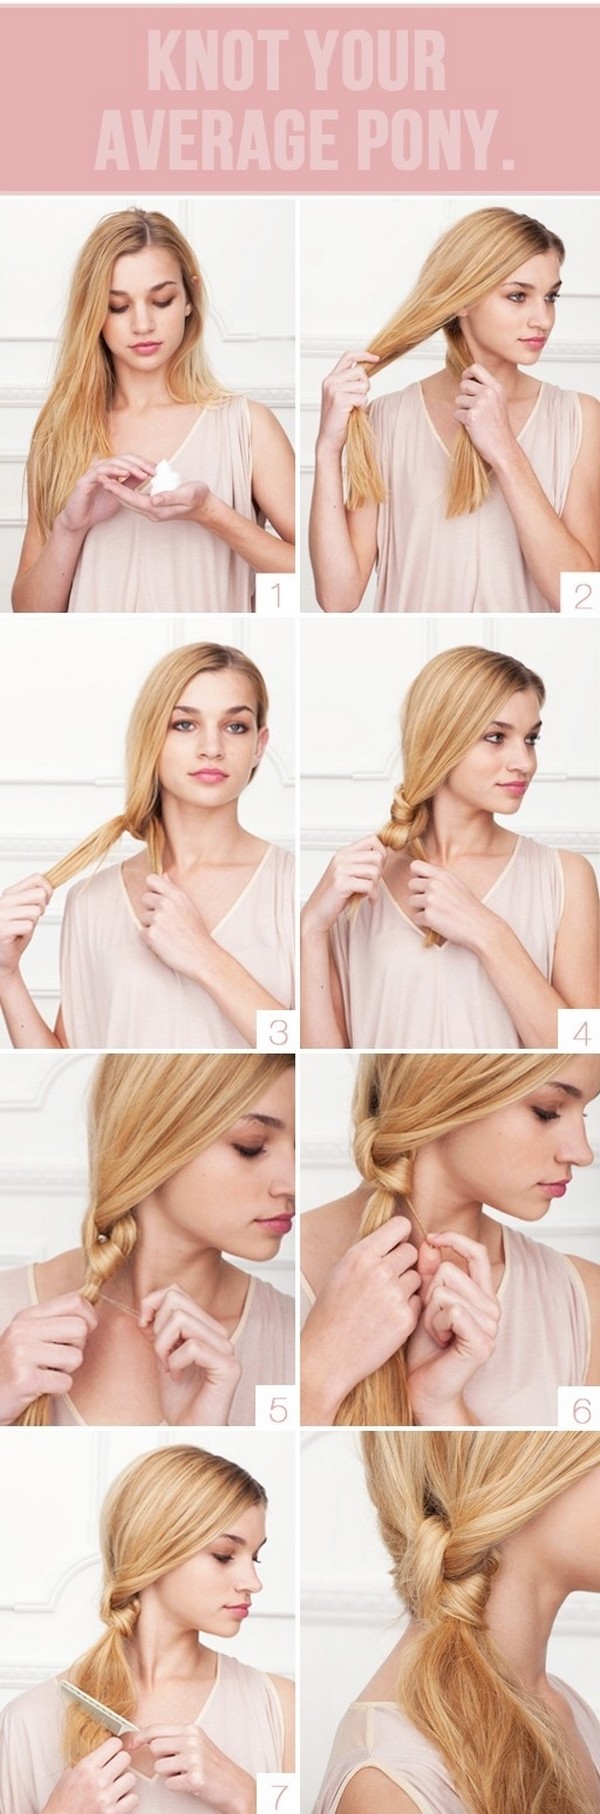 Insanely-Easy-Knotted-Ponytail-Heres-a-quick-and-easy-tutorial-perfect-for-those-days-when-youre-short-on-time..jpg